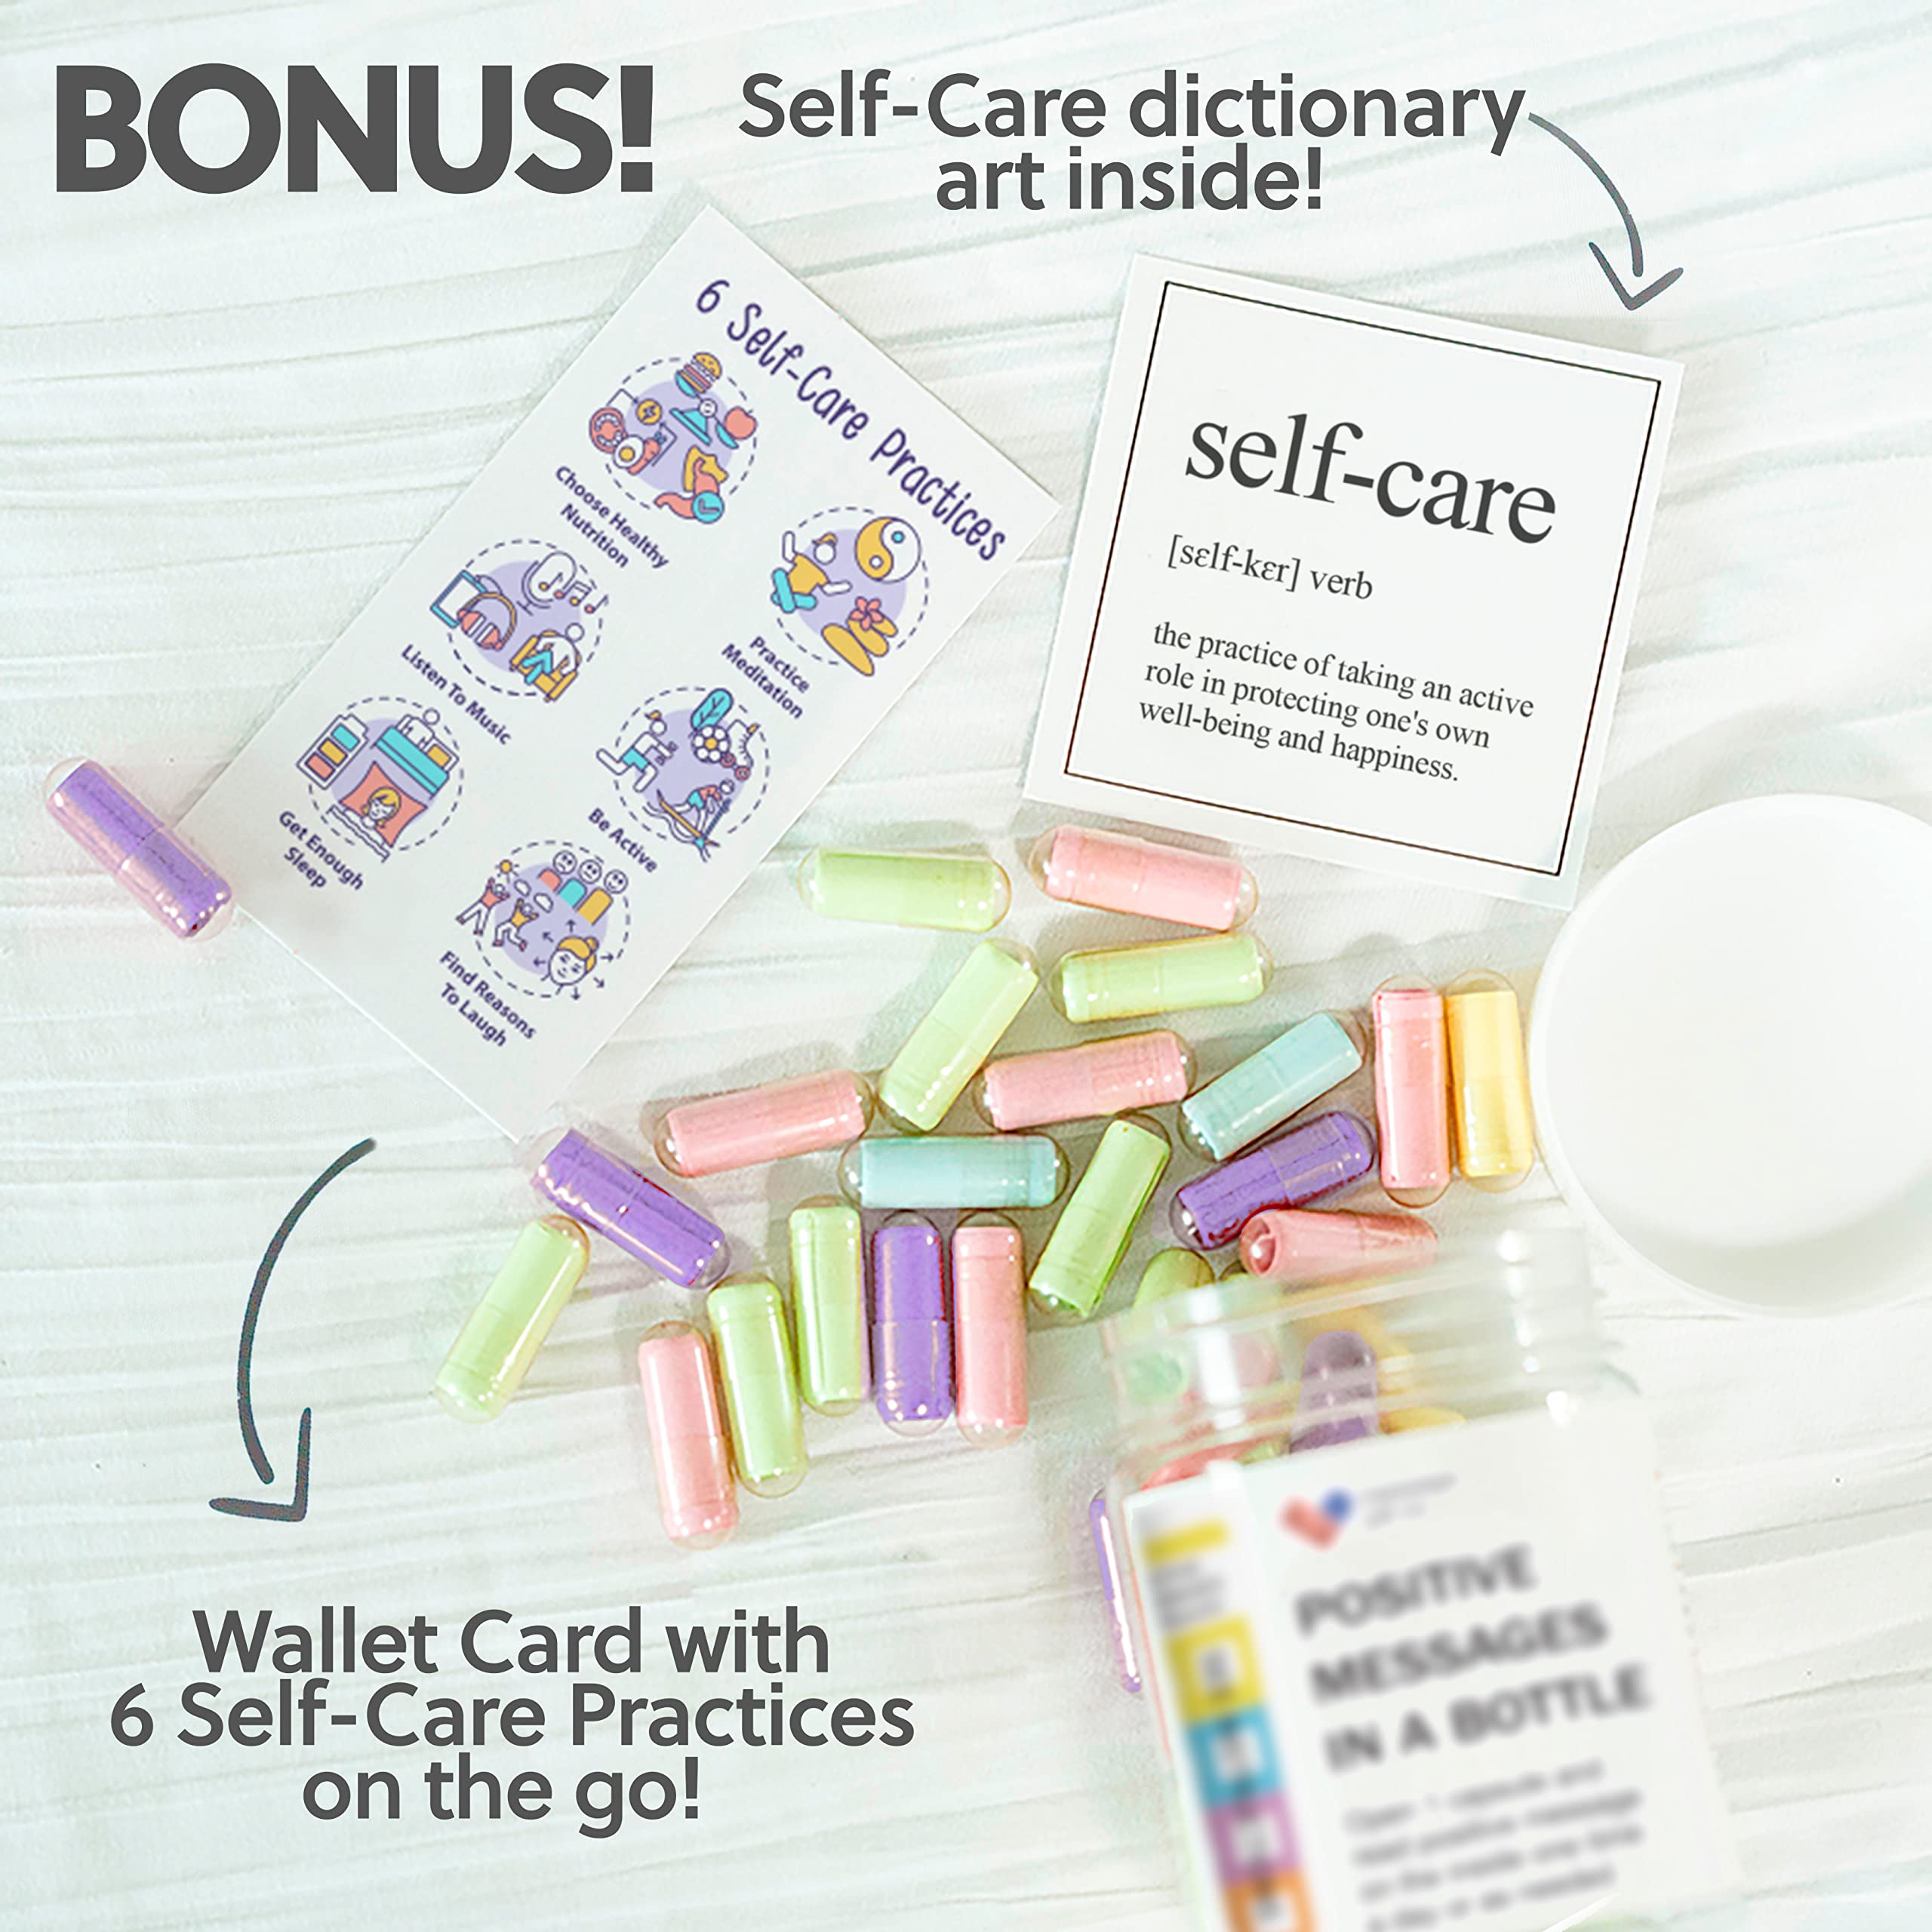 MESSAGE PILL CO. Self Care Gifts - 50 Positive Affirmations Get Well Soon Gifts for Women and Men Stress Relief. Self Care Kit with Daily Messages for Meditation, Mindfulness & Relaxation